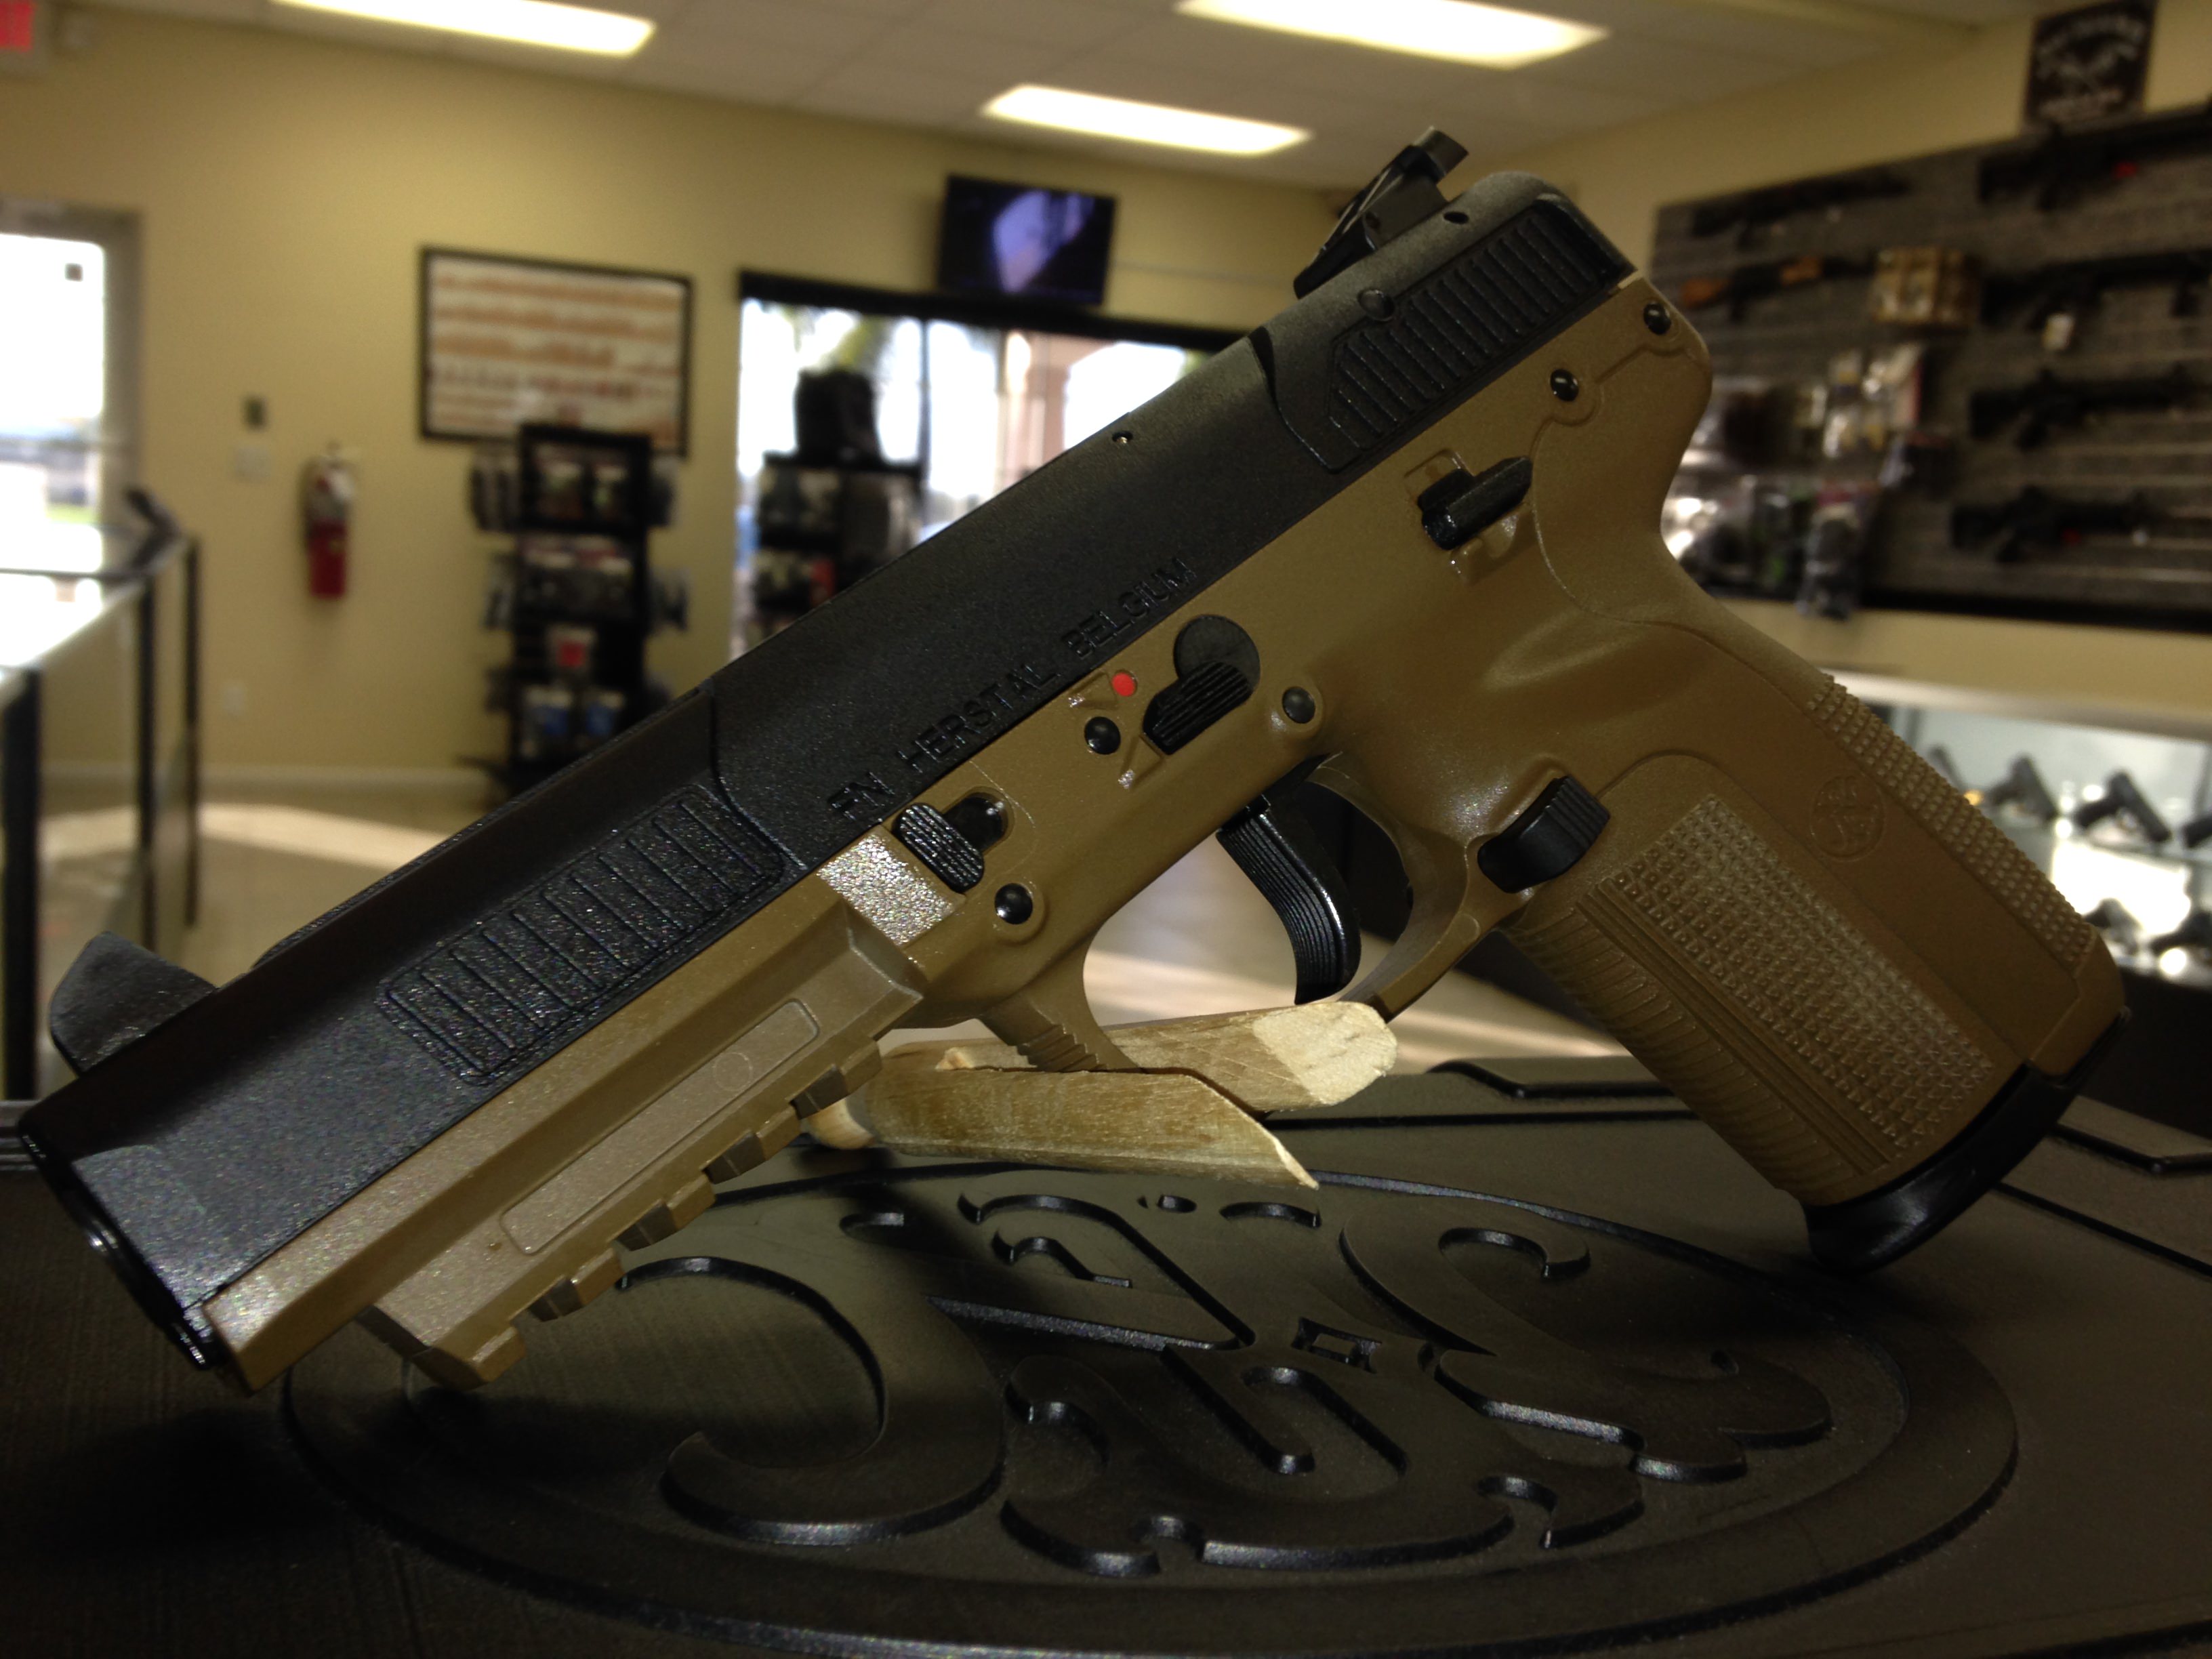 Price Reduction on FN Five Seven Pistol and 1,700 rounds